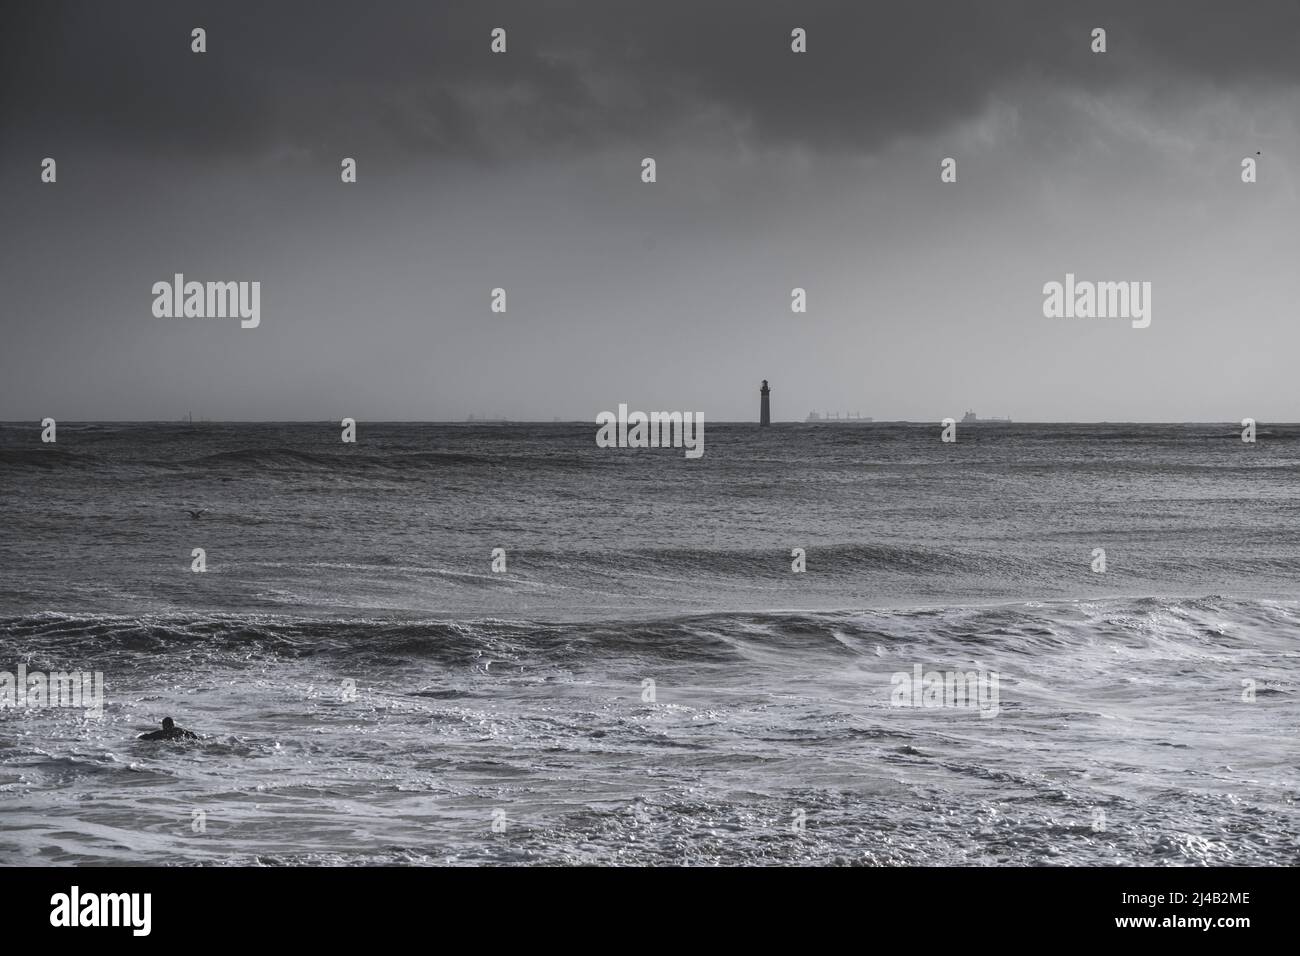 silhouette of surfer in waves with Chauveau lighthouse, the famous lighthouse near La Rochelle and Re island Stock Photo